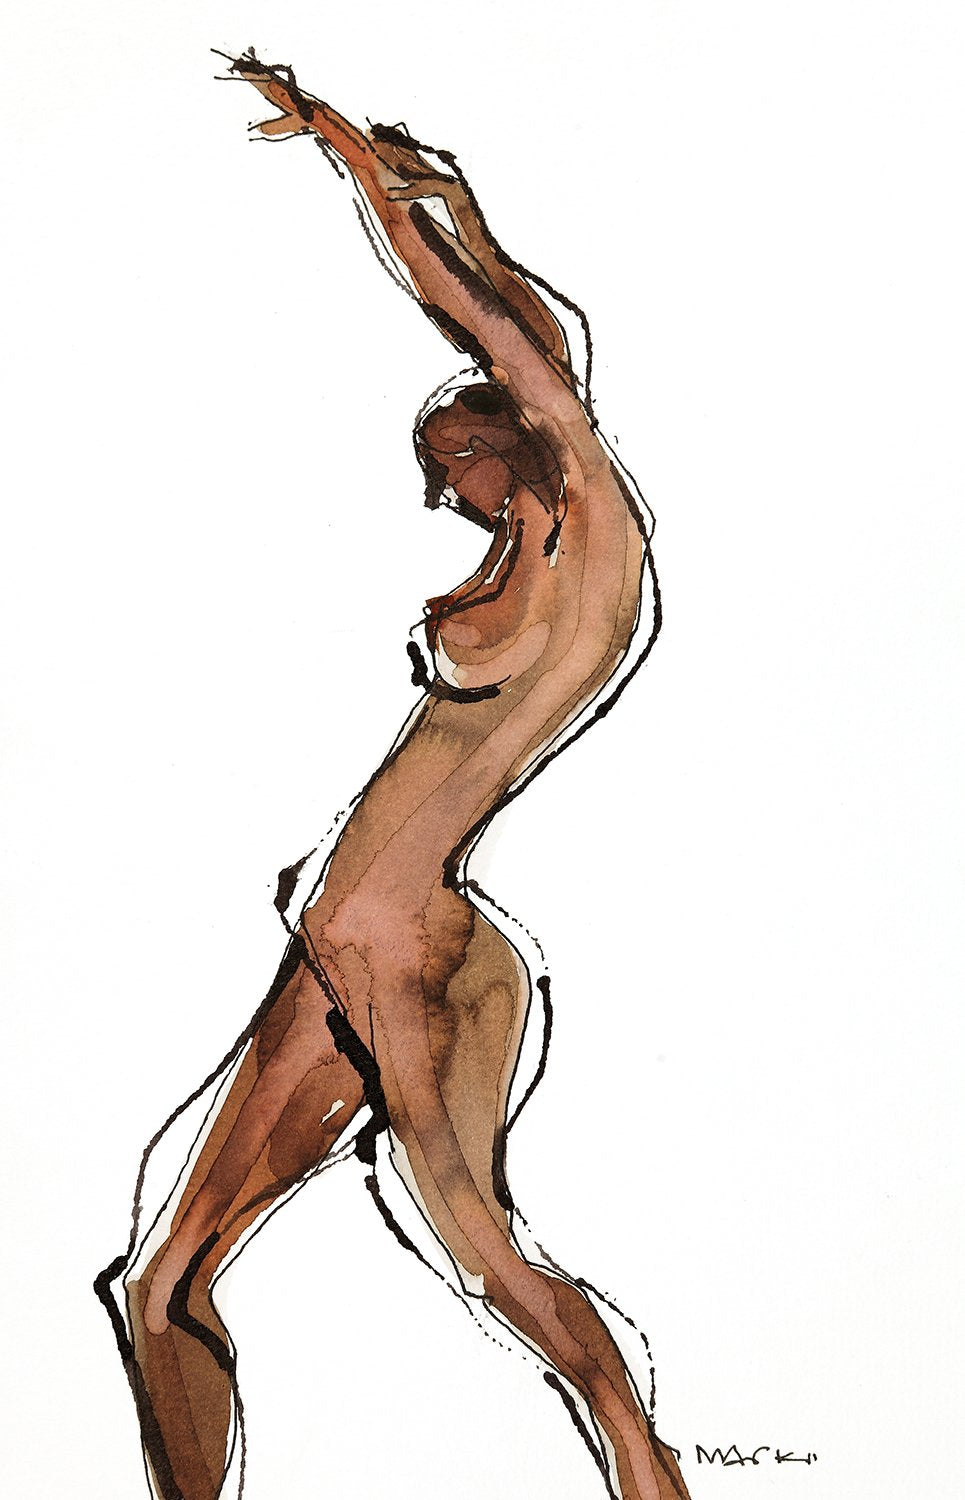 Nude 3|S. Mark Rathinaraj- Pen and Ink on Paper, , 8.5 x 5.5 inches